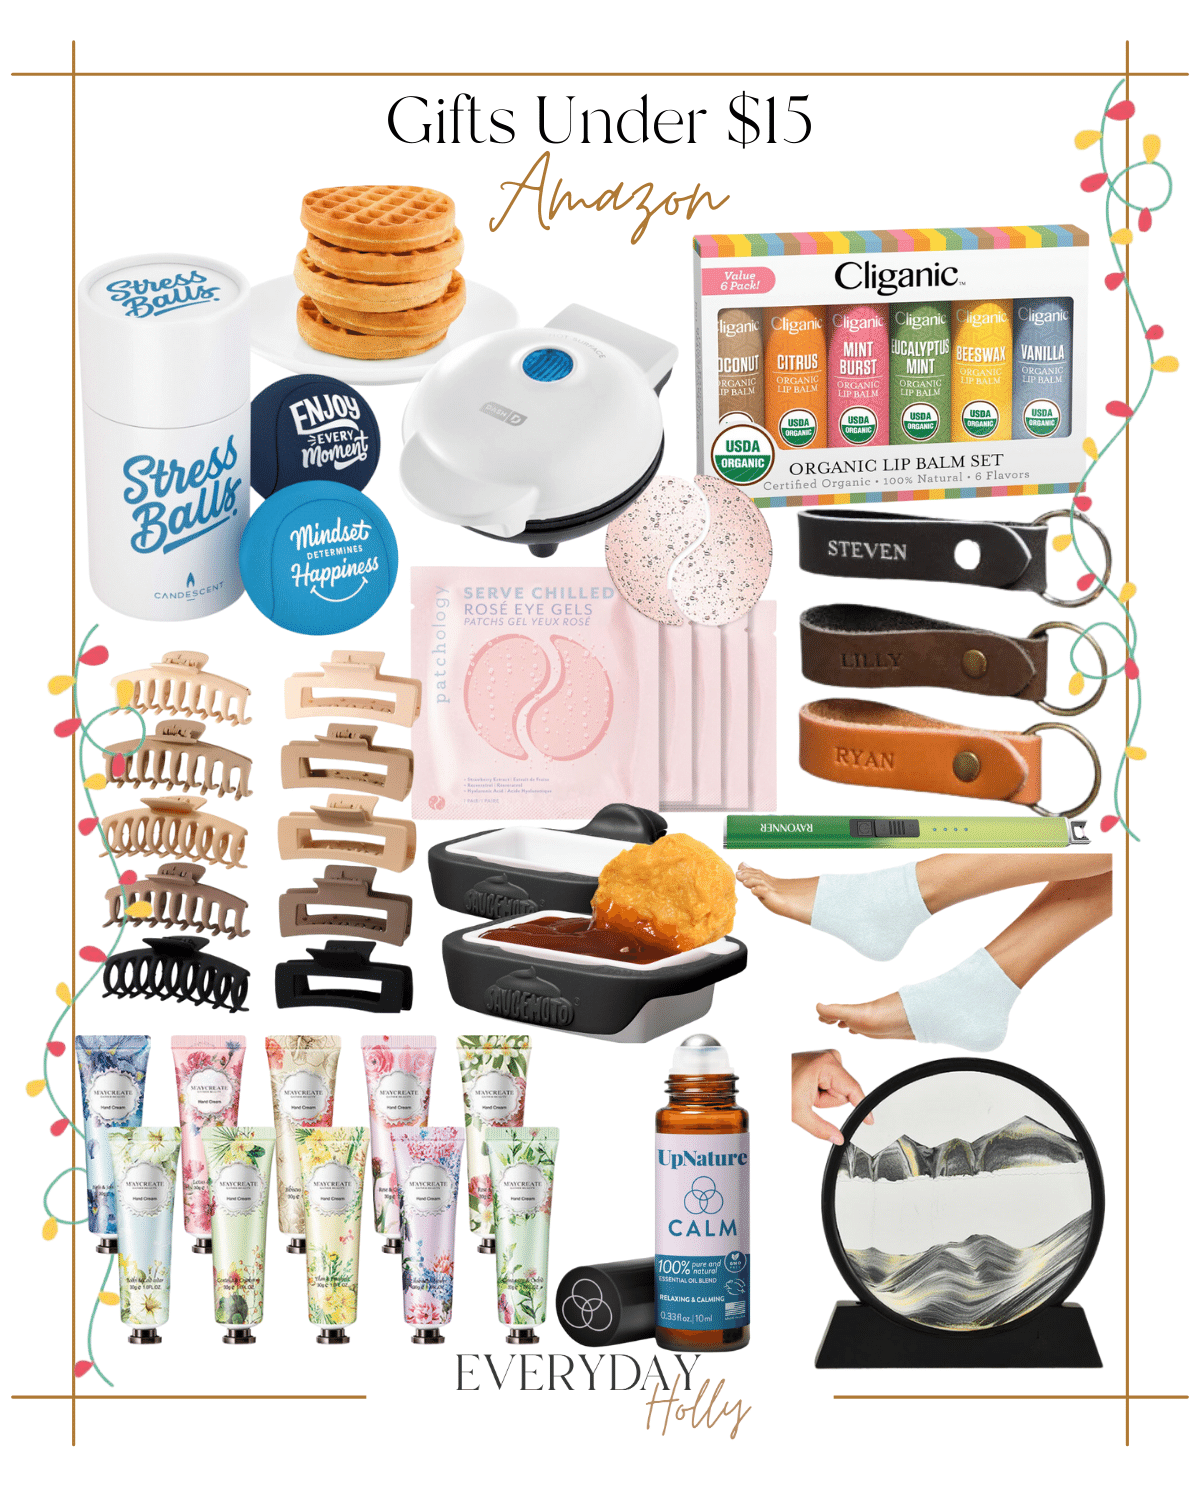 99 last minute gifts under $99 | #last #minute #gifts #giftideas #giftsunder99 #under99 #under15 #stressrelief #waffle #lotion #lipbalm #keychain #eyemask #beauty #clawclips #hairaccessories #sauce #lotion